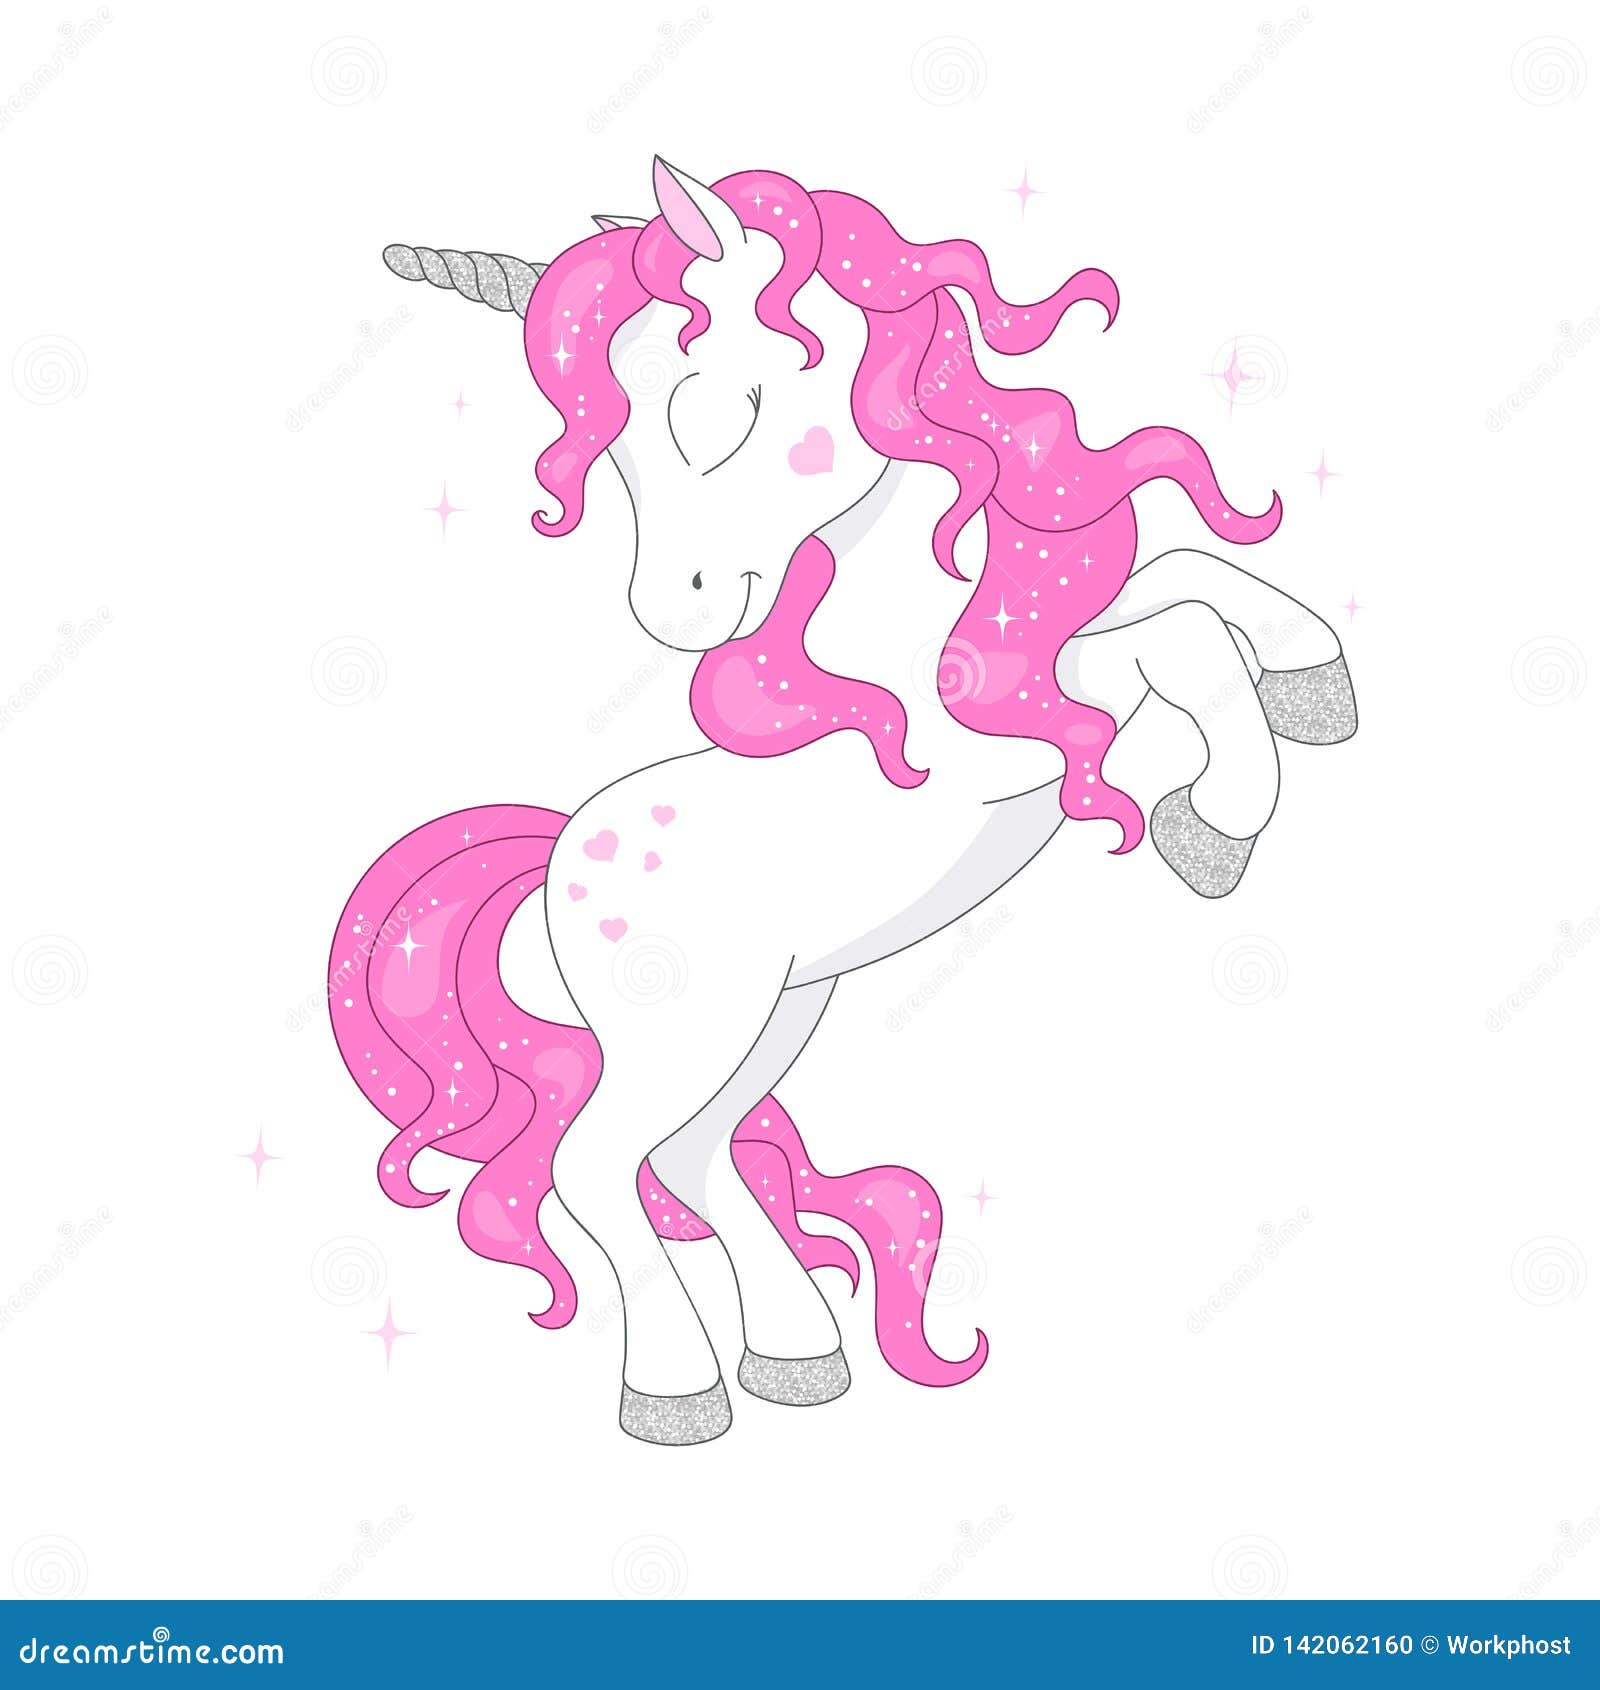 Amazing Glitter Unicorn Drawing For T-shirts. Design For ...